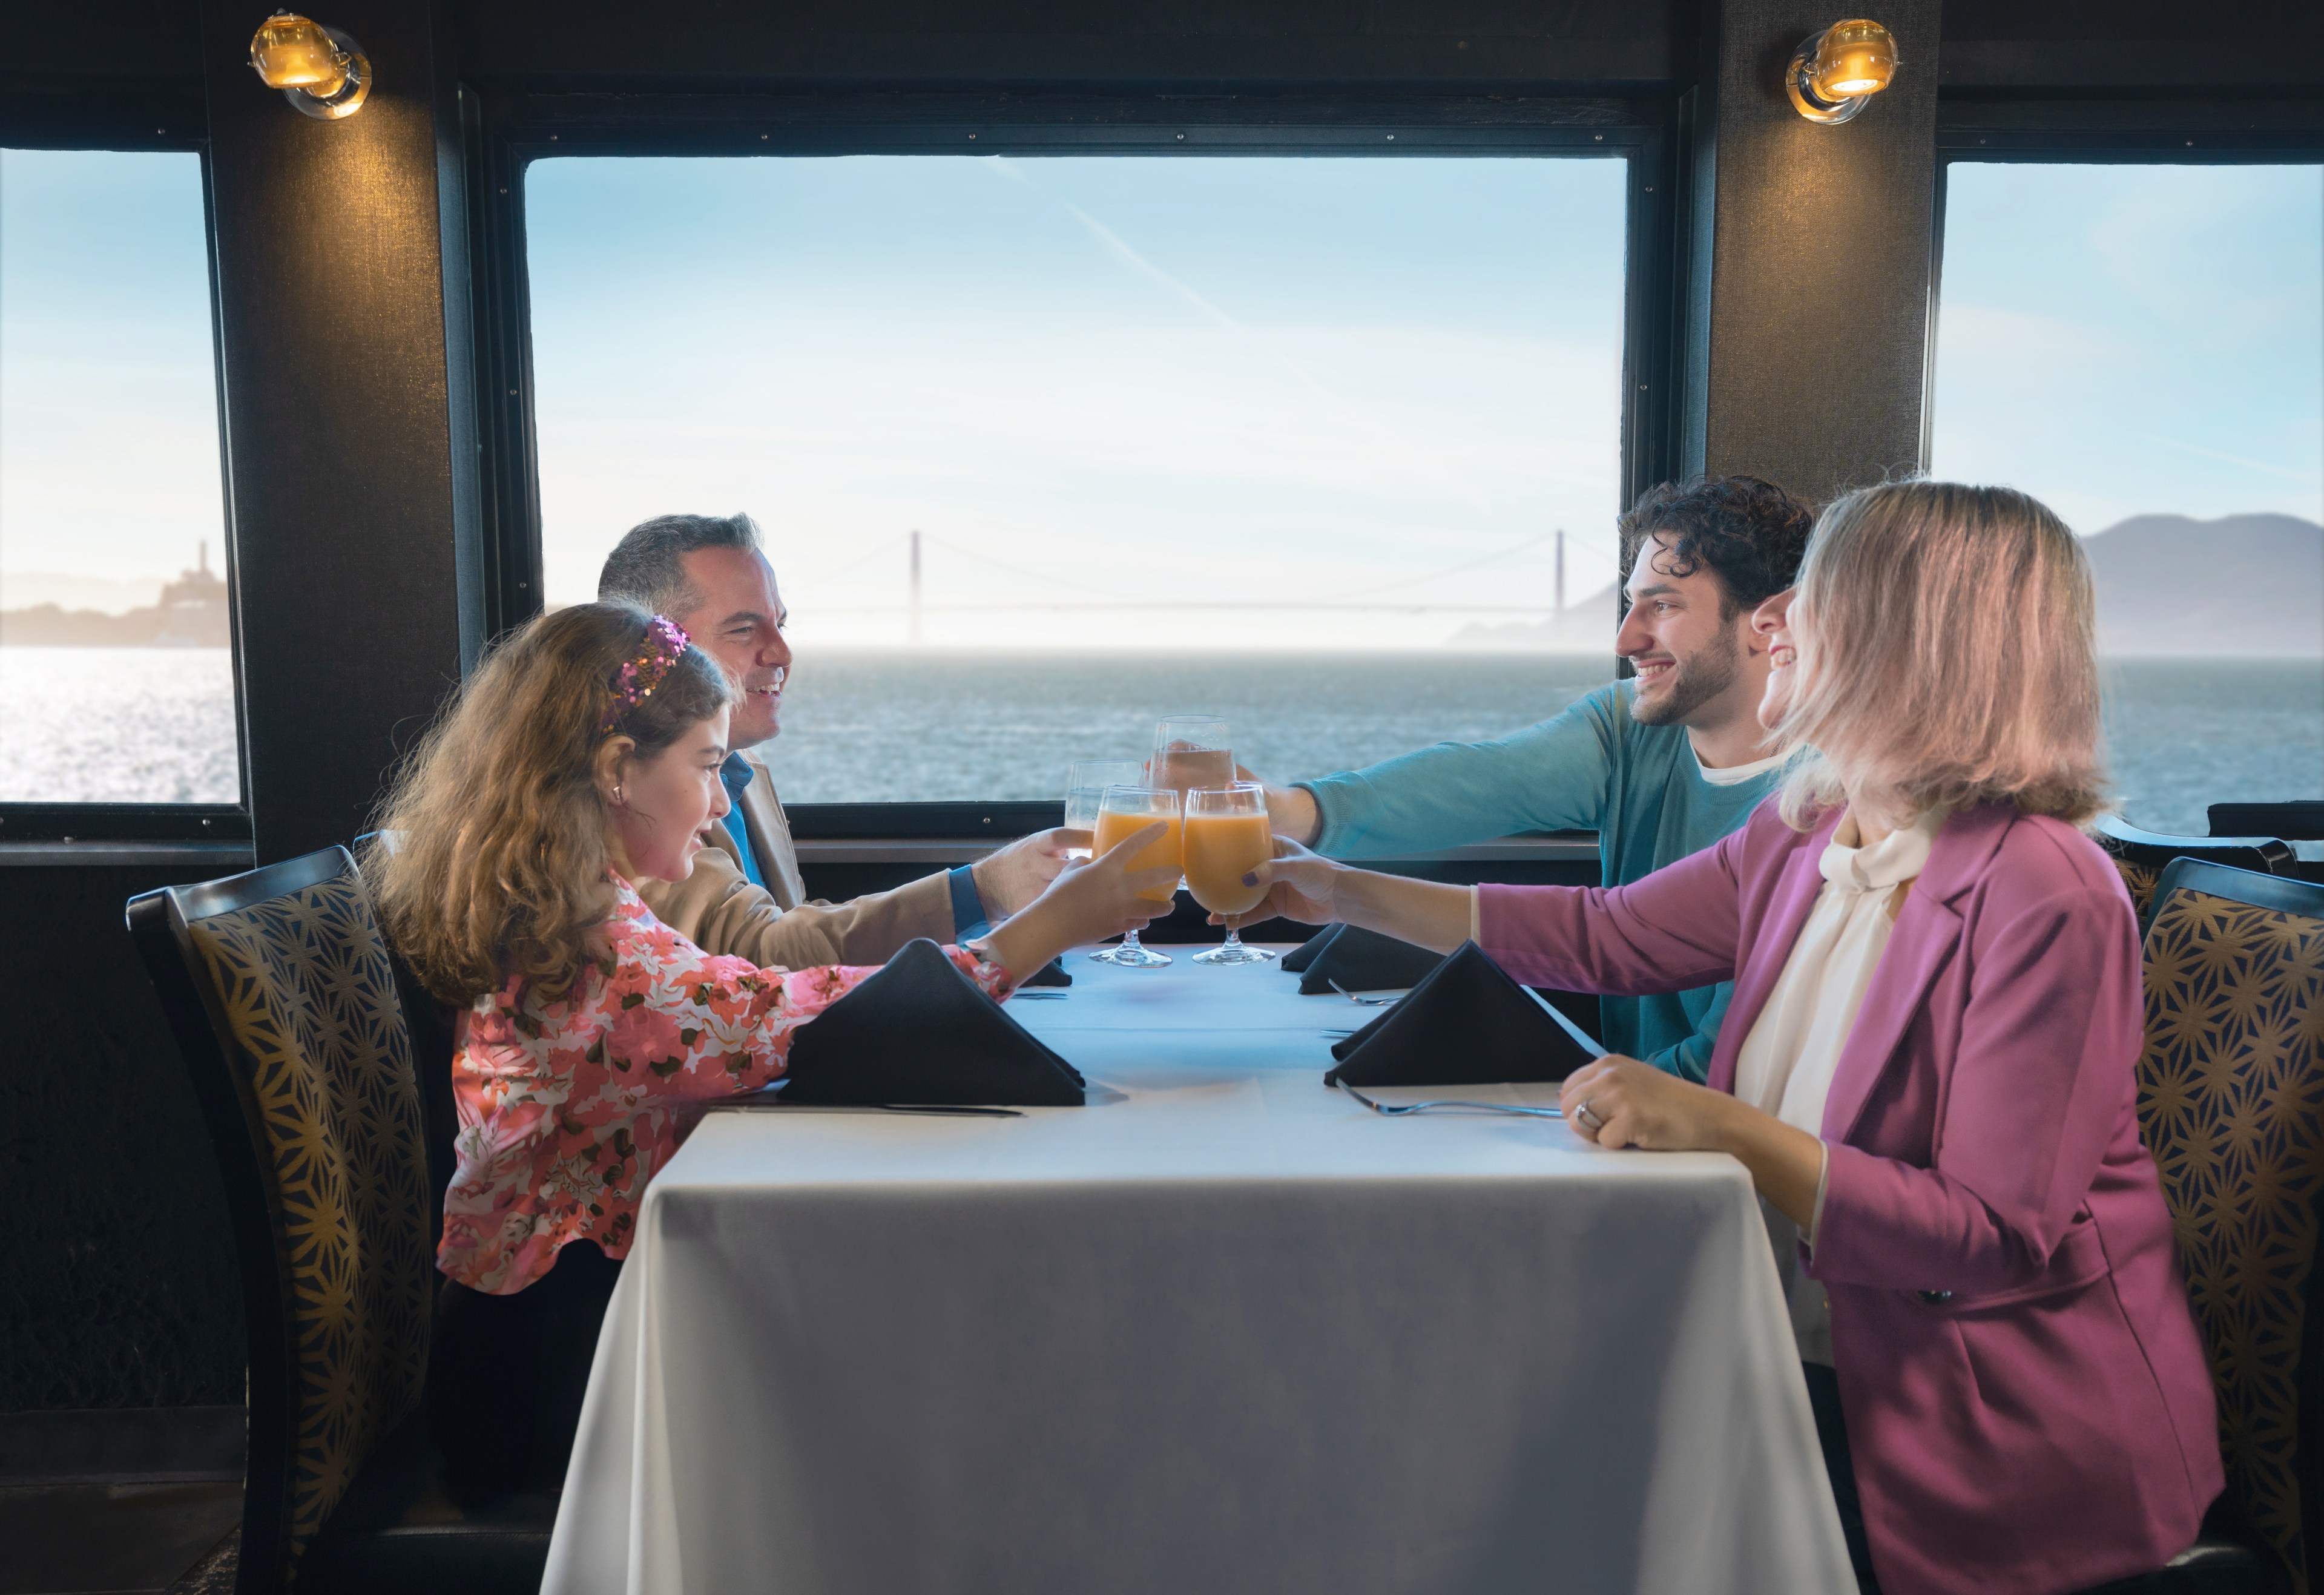 Four people are toasting drinks at a table by a window with a bridge and water outside.